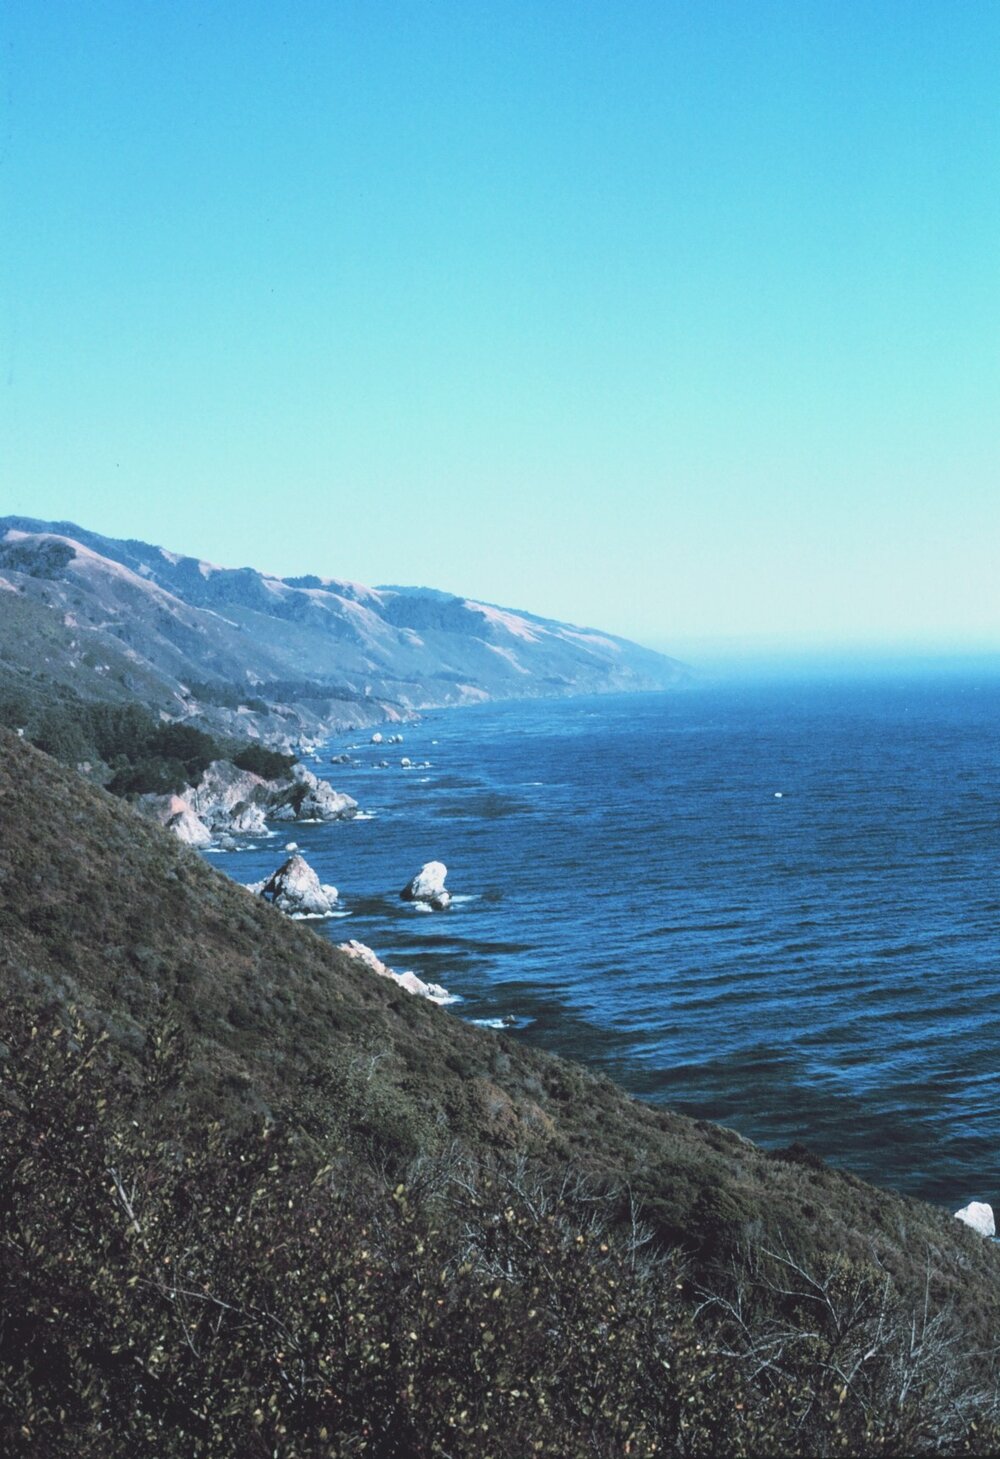 "The Big Sur coastline as seen while traveling along Highway 1" (1989) By Ben Mieremet (Affiliation: NOAA)